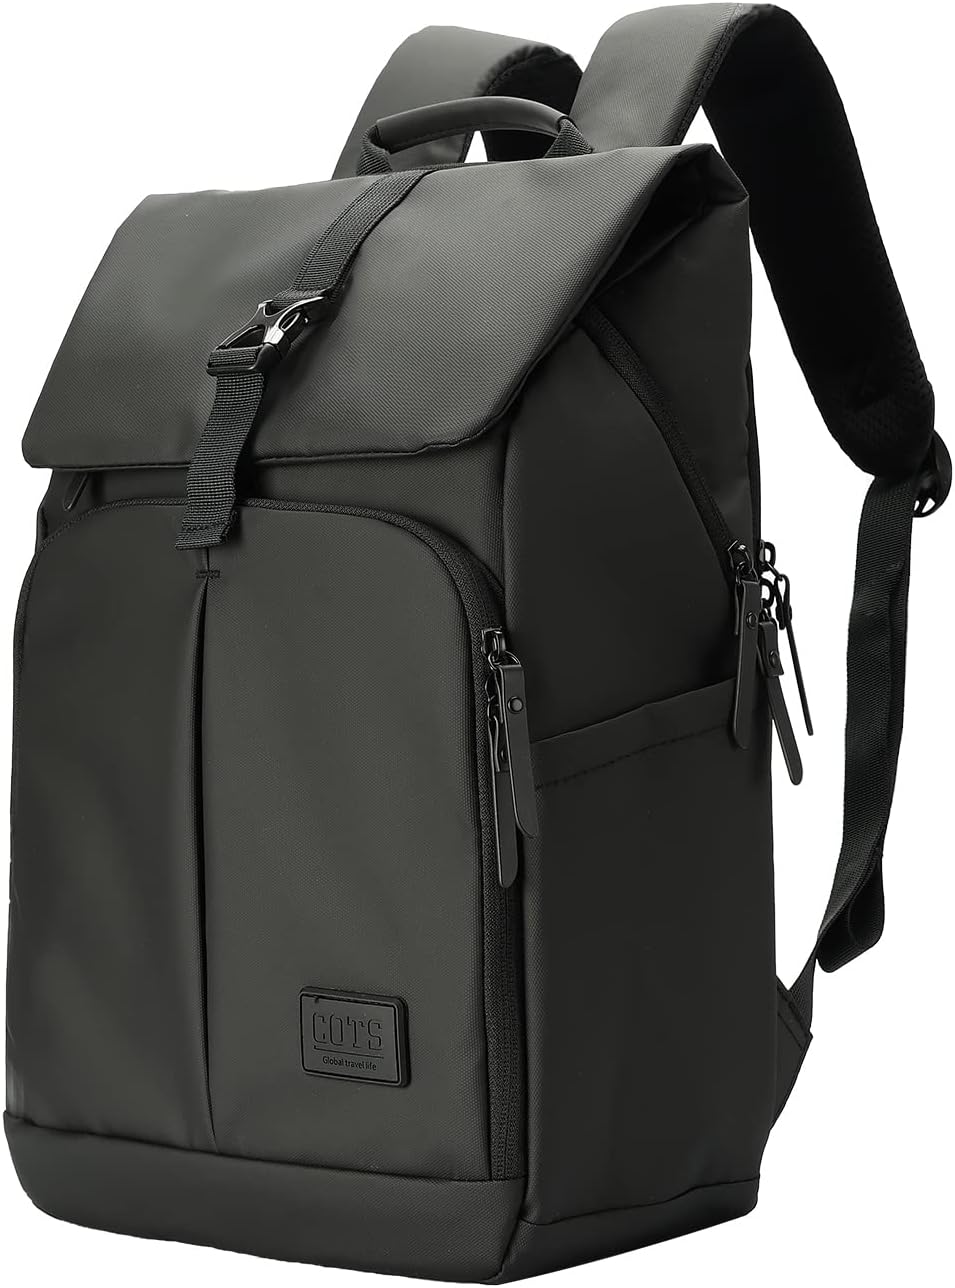 COTS Laptop Backpack for Work, Unisex Business Travel [...]